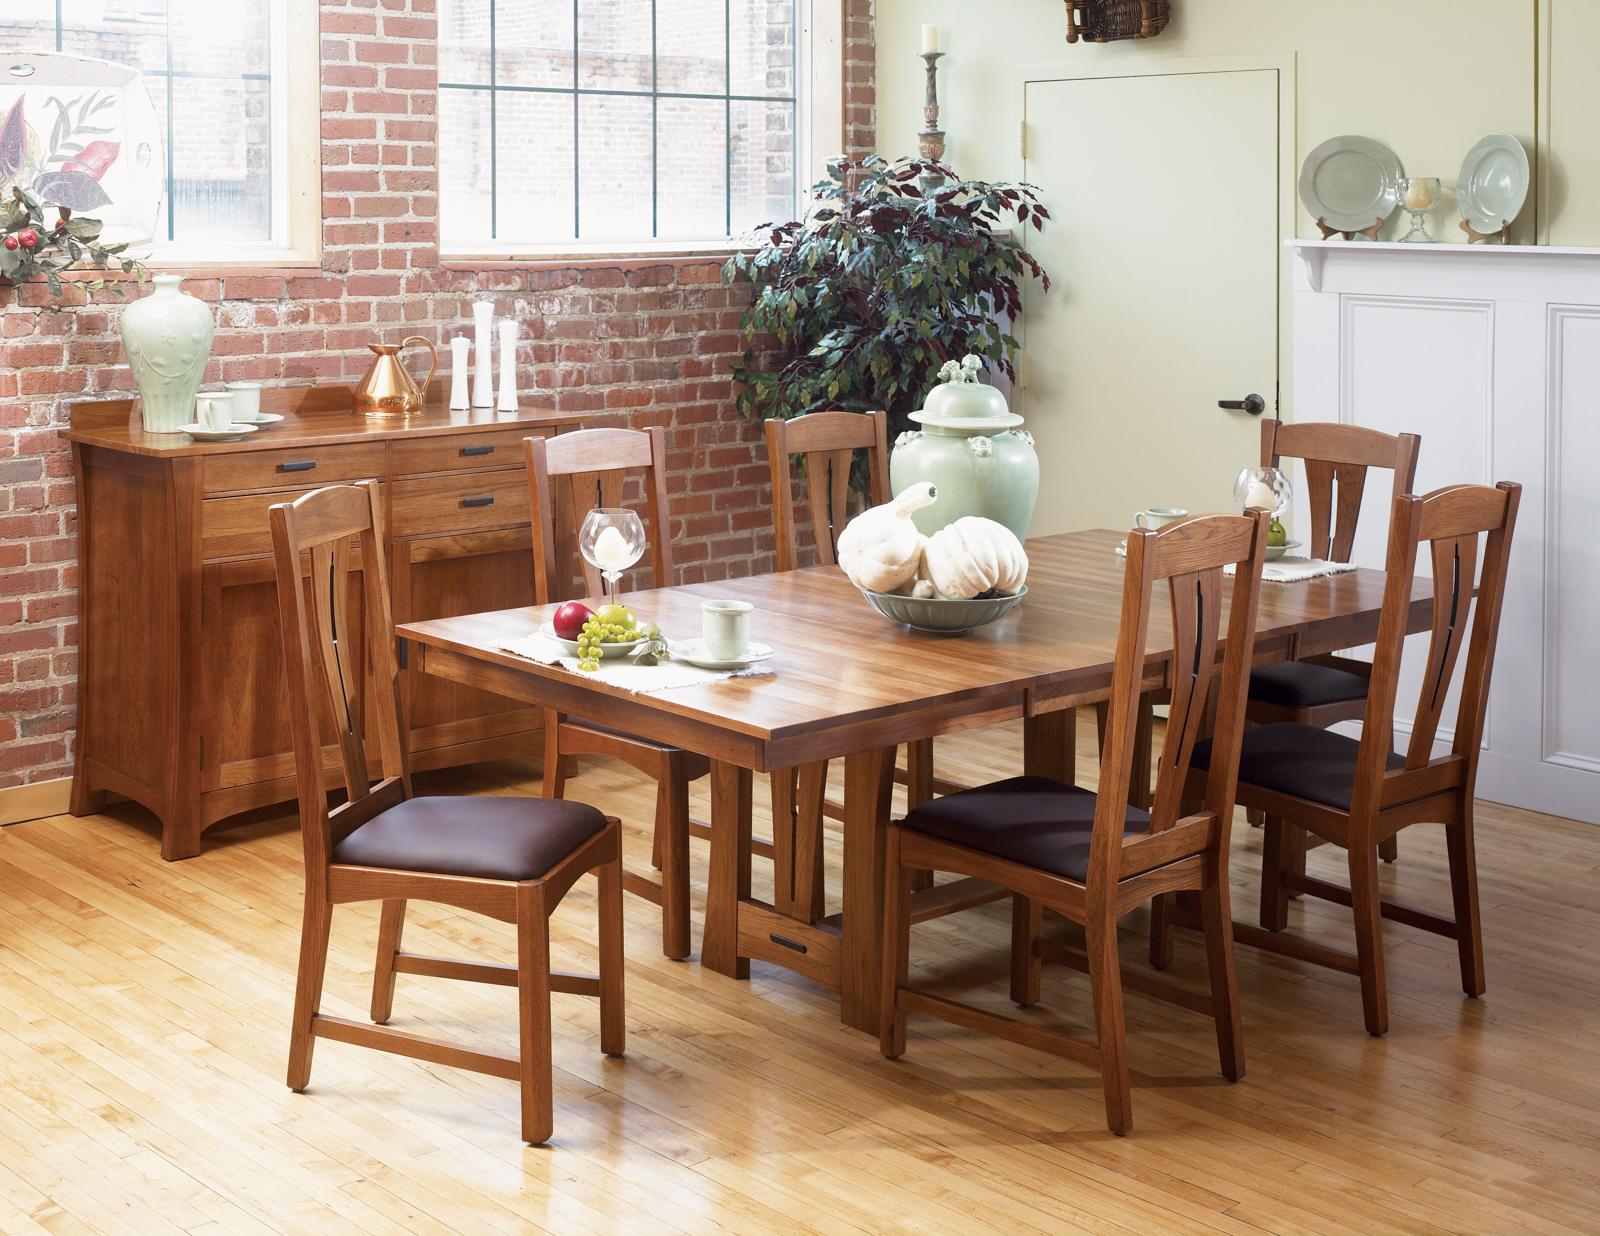 

    
Trestle Dining Table Set 7Pcs Amber Solid Wood CATAM6300 A-America Cattail Bungalow
